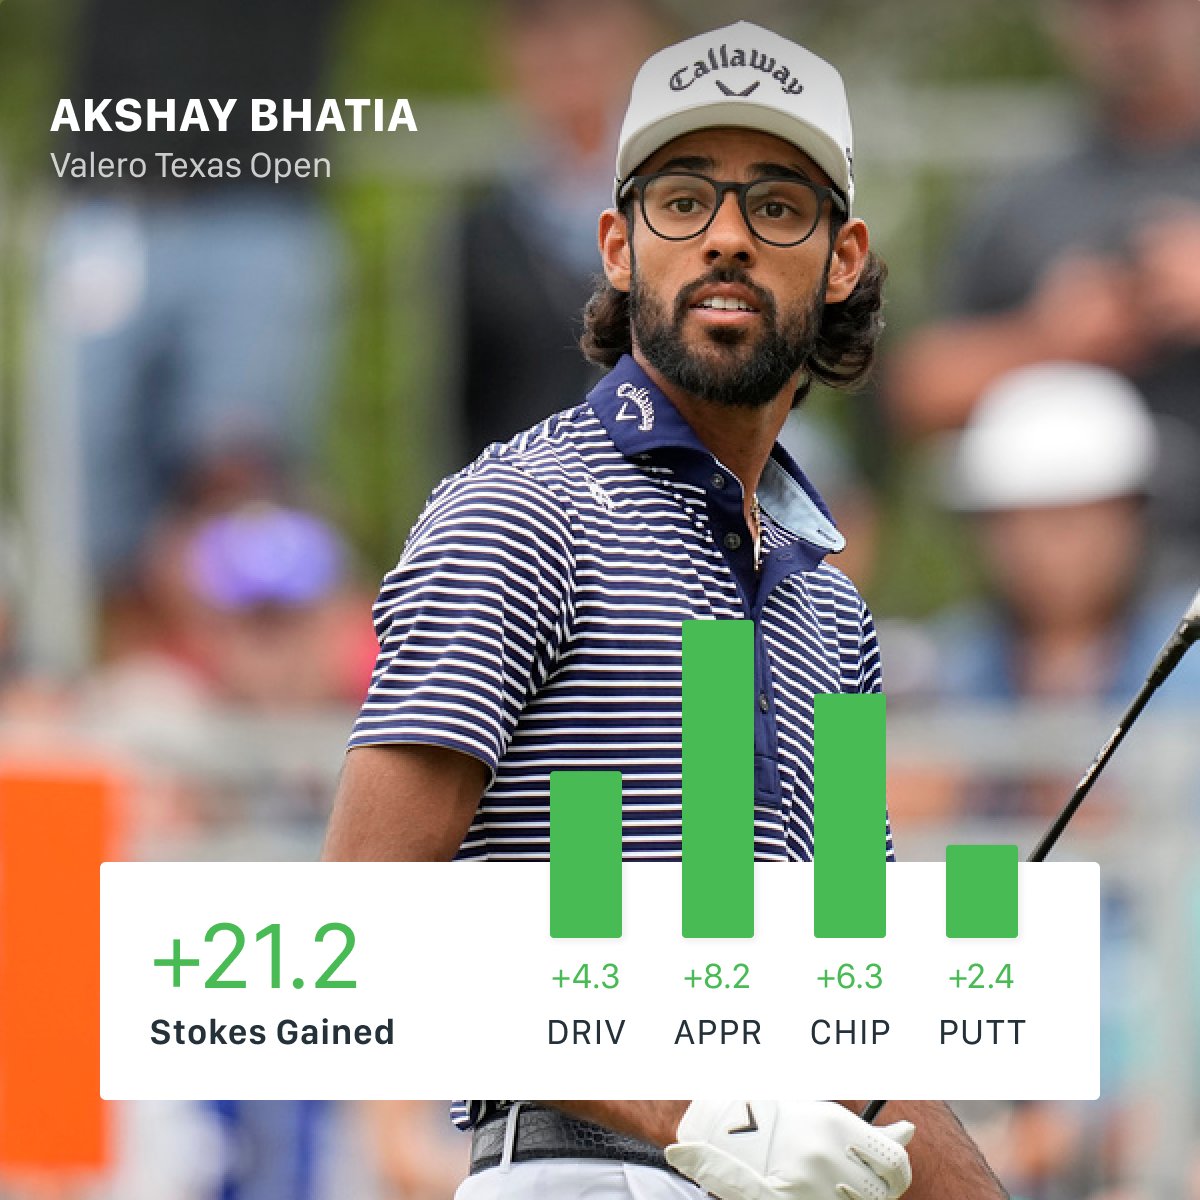 Akshay won the two-man race. Both Akshay Bhatia and Denny McCarthy beat the field average at the Valero Texas Open by more than 20 strokes, and went into a playoff nine strokes ahead of their nearest competitor. While McCarthy was putting the eyes out of it, Bhatia relied on…